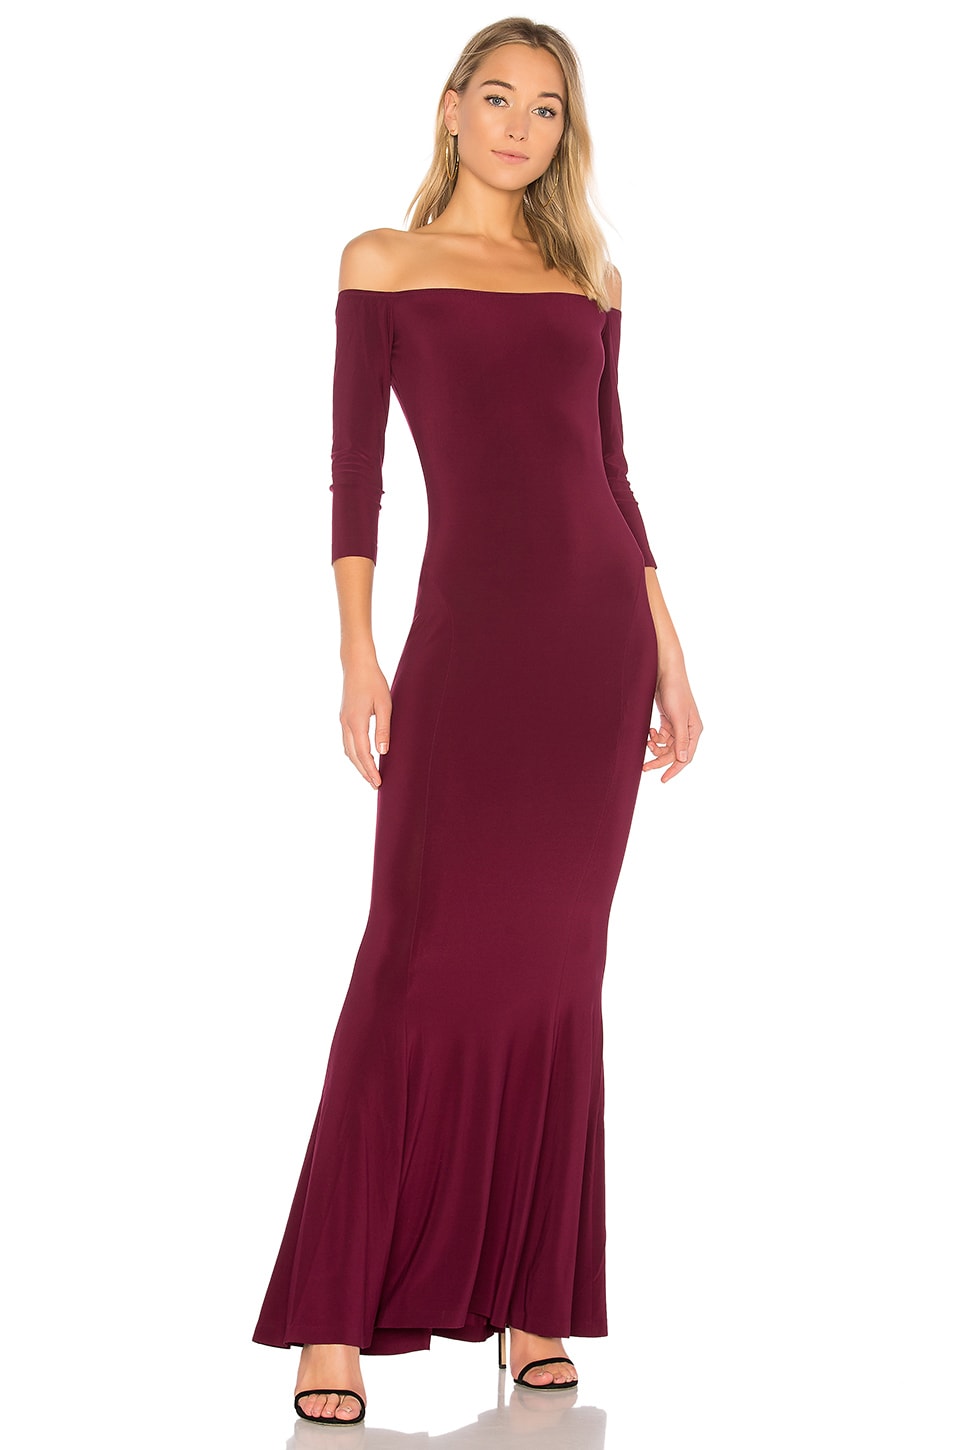 Norma Kamali x REVOLVE Off the Shoulder Fishtail Gown in Plum | REVOLVE